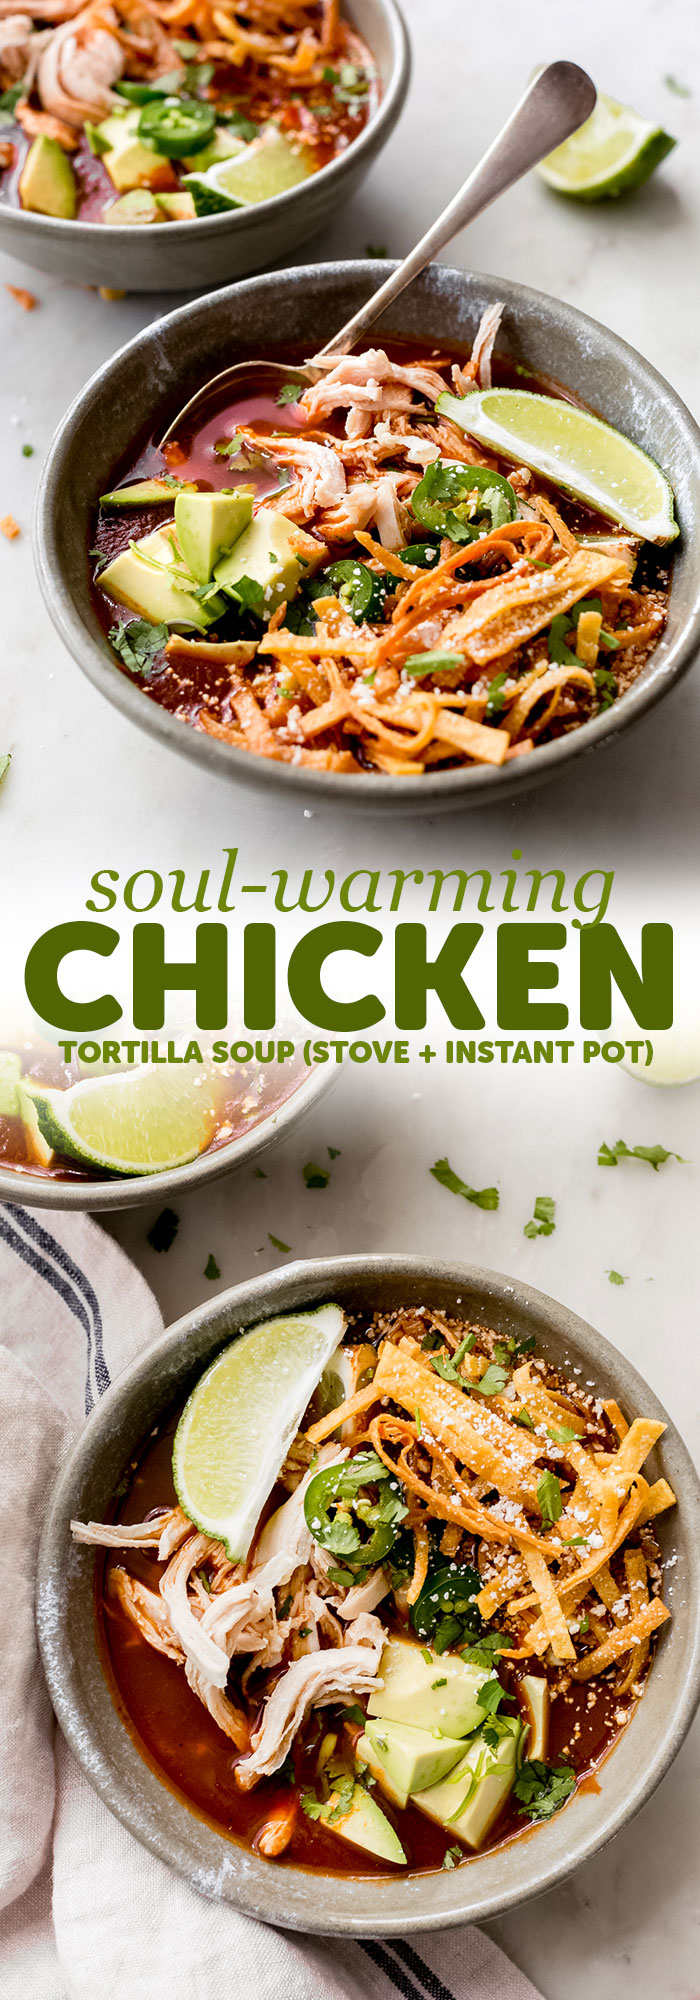 Soul-Warming Chicken Tortilla Soup - Learn how to make a warm chicken tortilla soup, in your instant pot or on the stove top! So easy and so authentic! #chickentortillasoup #tortillasoup #instantpot #instantpottortillasoup #chickensoup #souprecipe | Littlespicejar.com